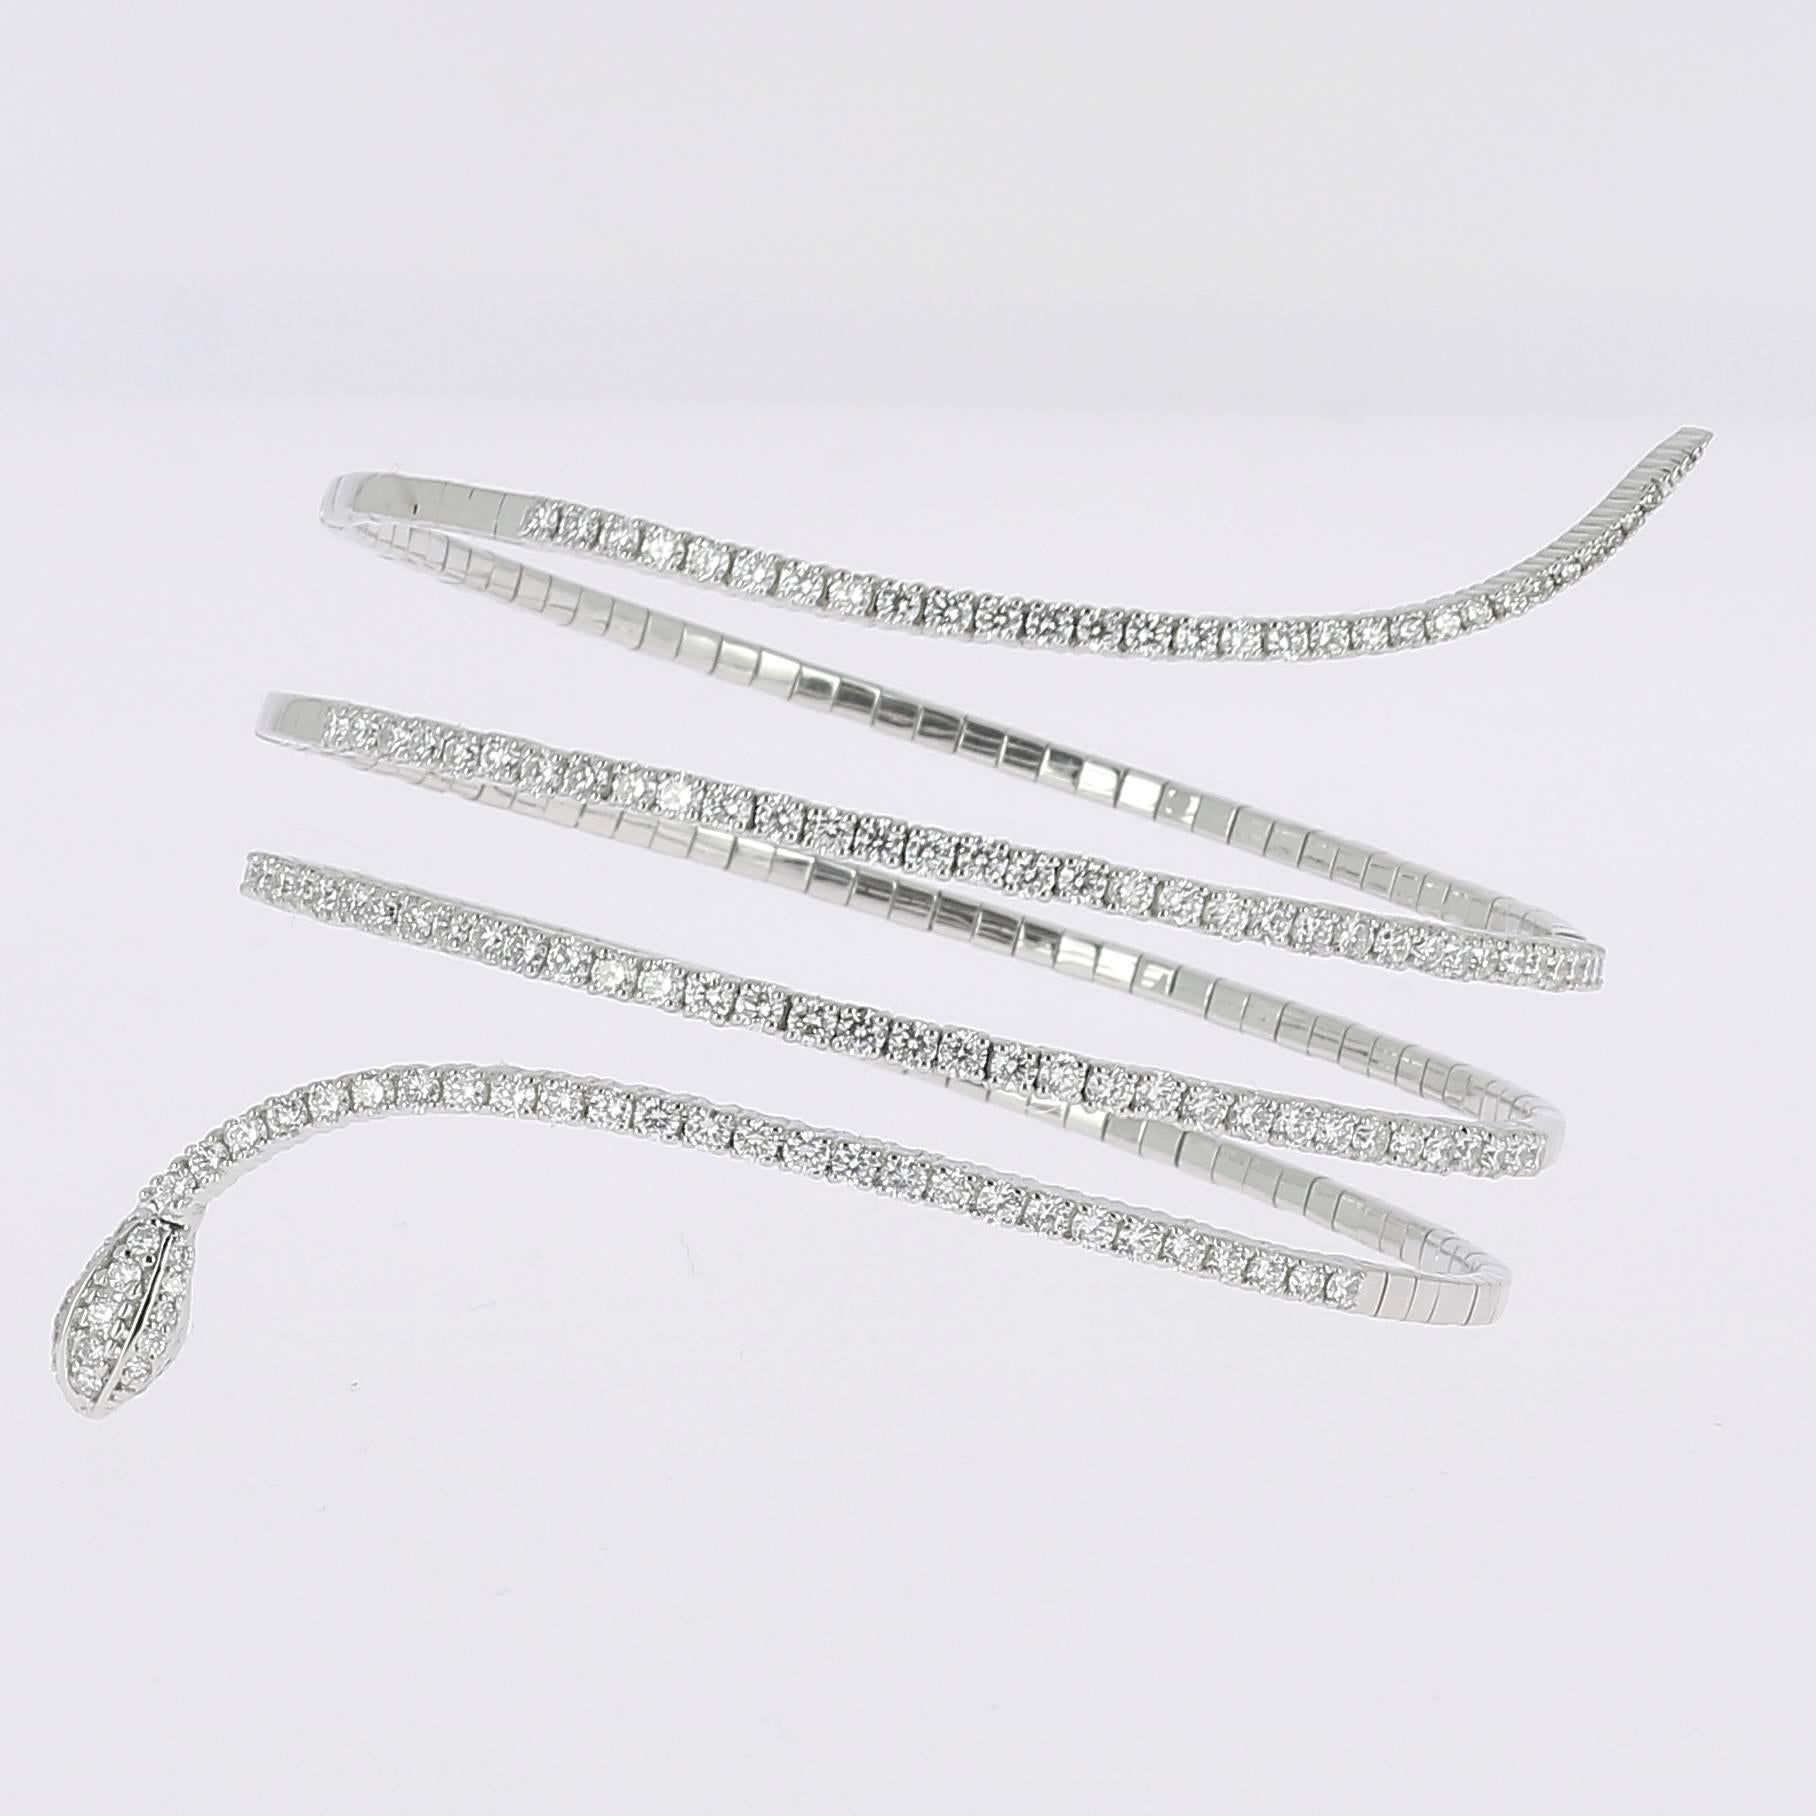 The Snake Diamond Bracelet is a masterpiece, paved with round diamonds on all the body of Snake.
The Diamond bracelet is set with 2.90 Carats and weight 20.90 Grams.
The Diamond Bracelet will come in a beautiful box ready for gifting.

HERITAGE